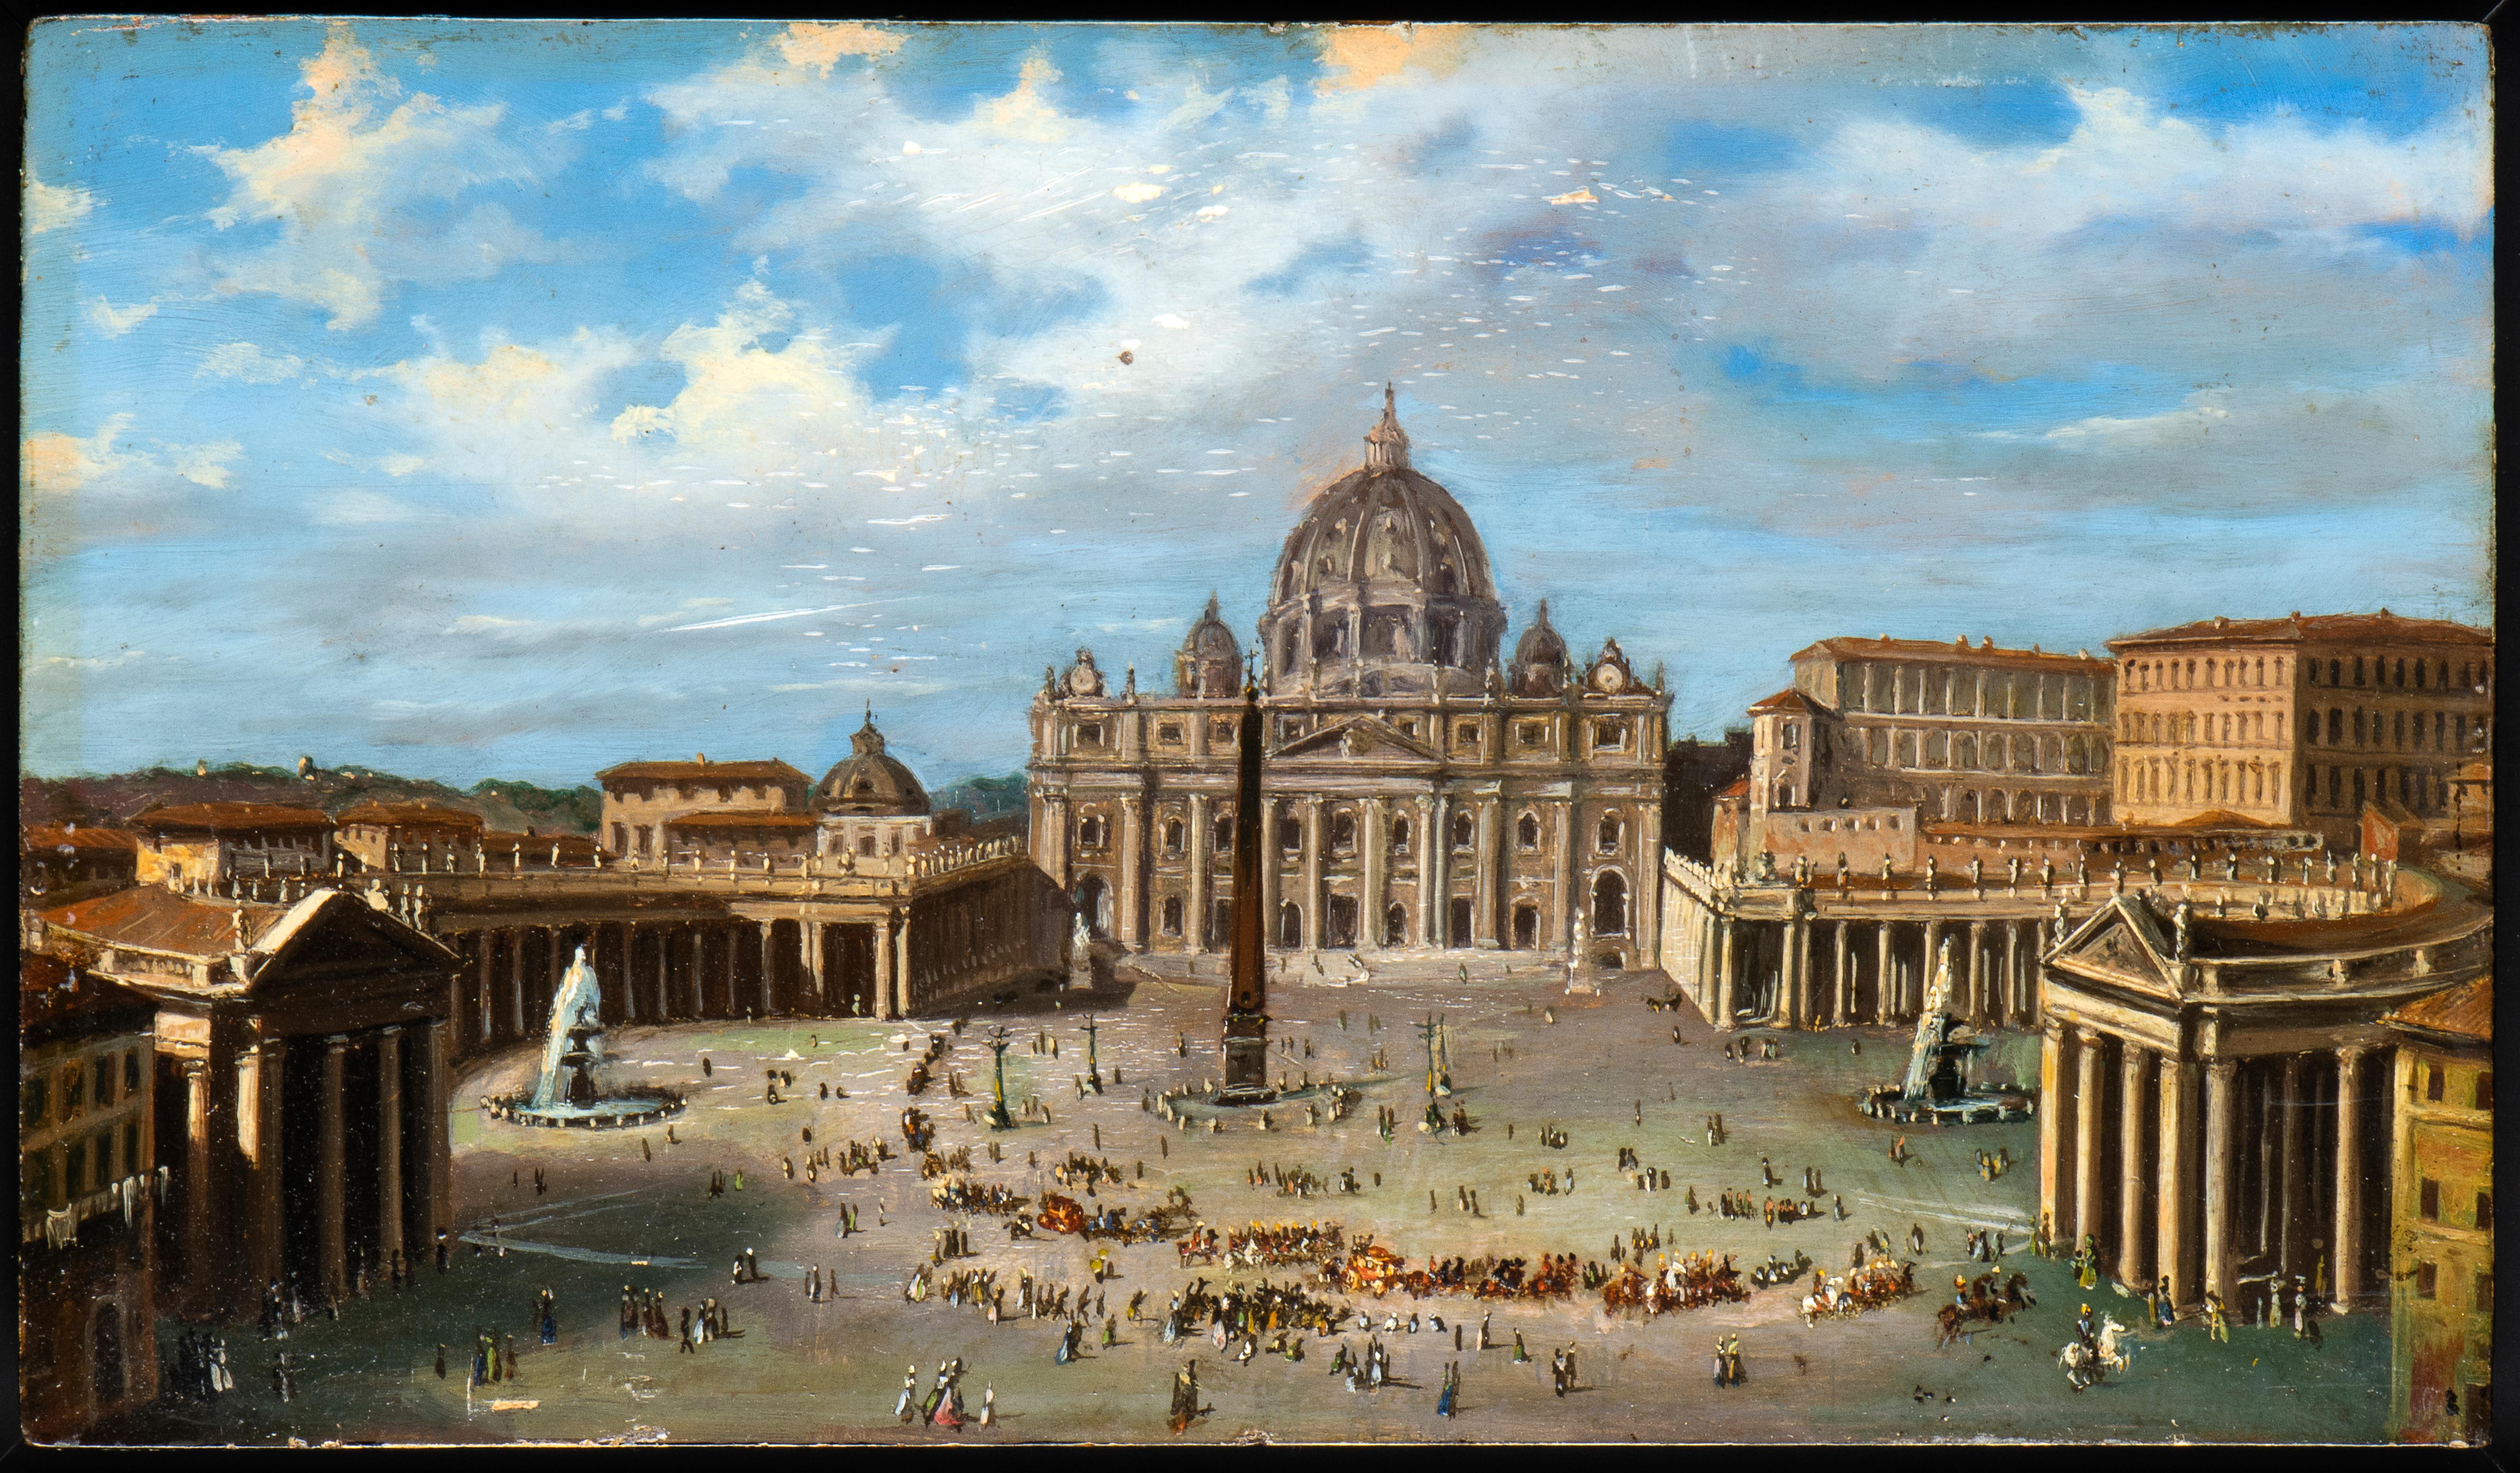 Oil Paint View Of St. Peter's Basilica With The Square and Colonnade and Obelisk - Painting by Unknown